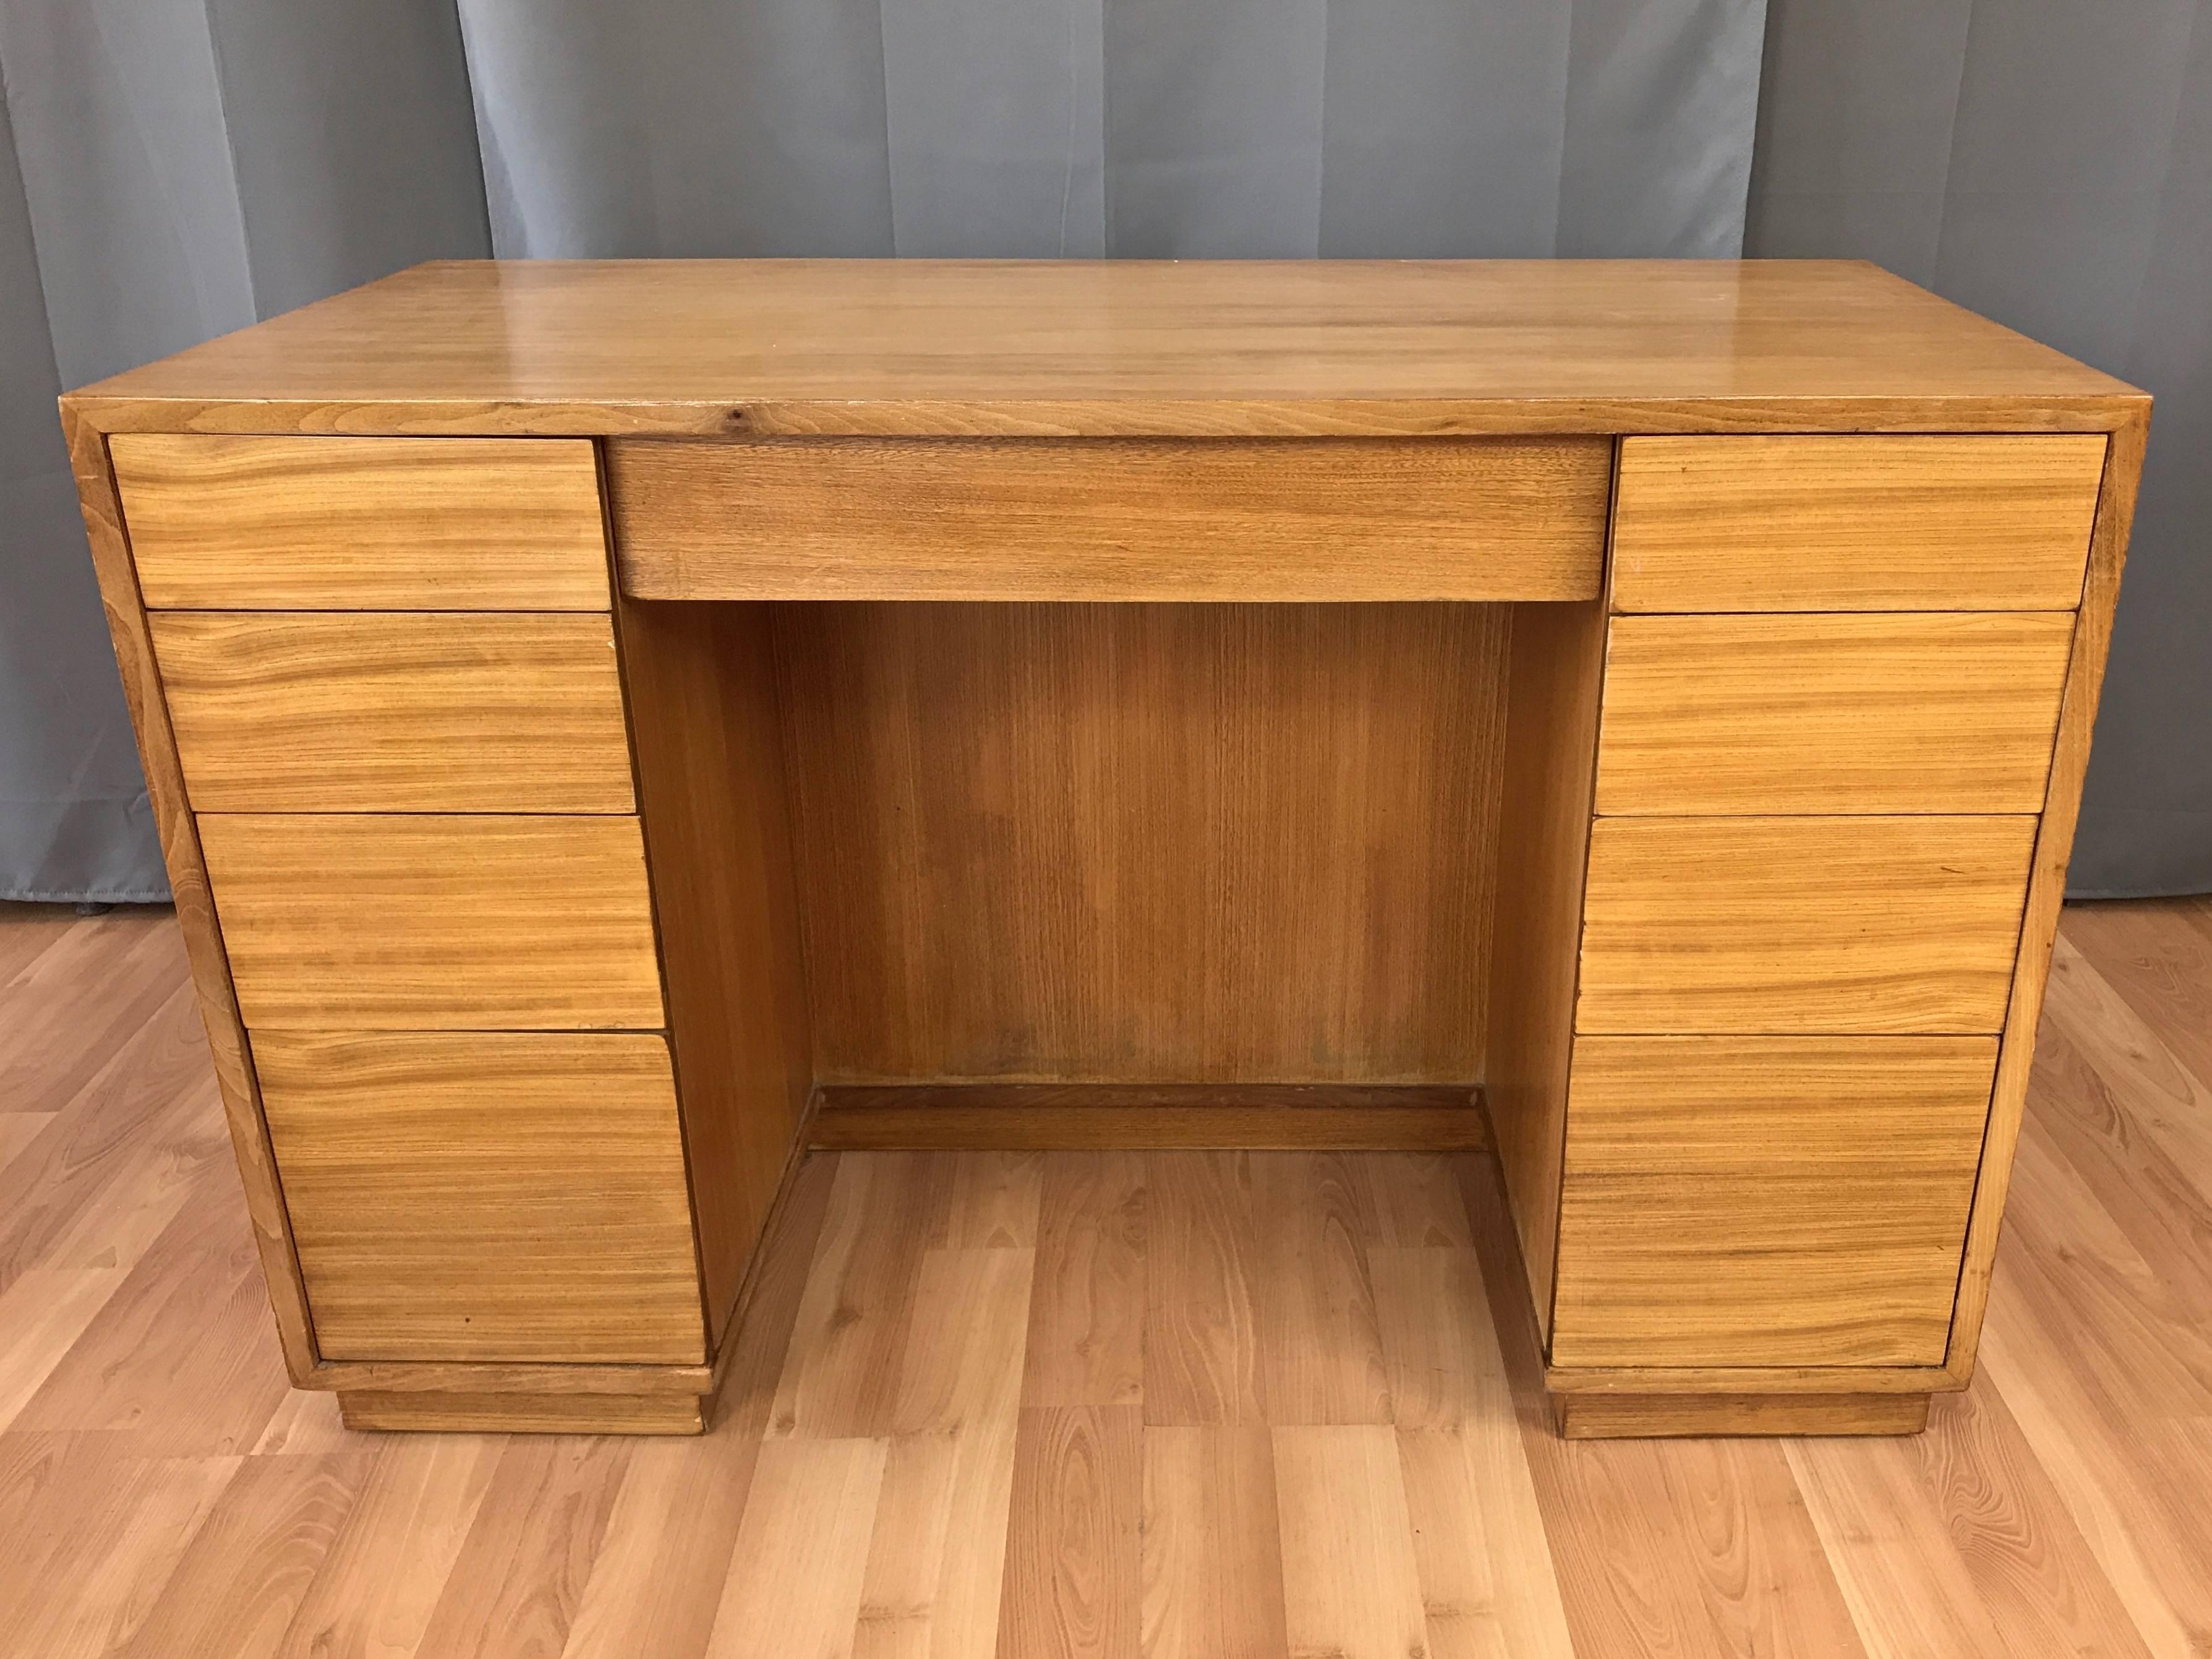 An uncommon Mid-Century Modern elm desk by Edward Wormley from his Precedent Collection for Drexel.

Clean-lined and compact design features nine drawers with hidden pulls and a pair of cubbies. Top left & right drawers have open sides, allowing